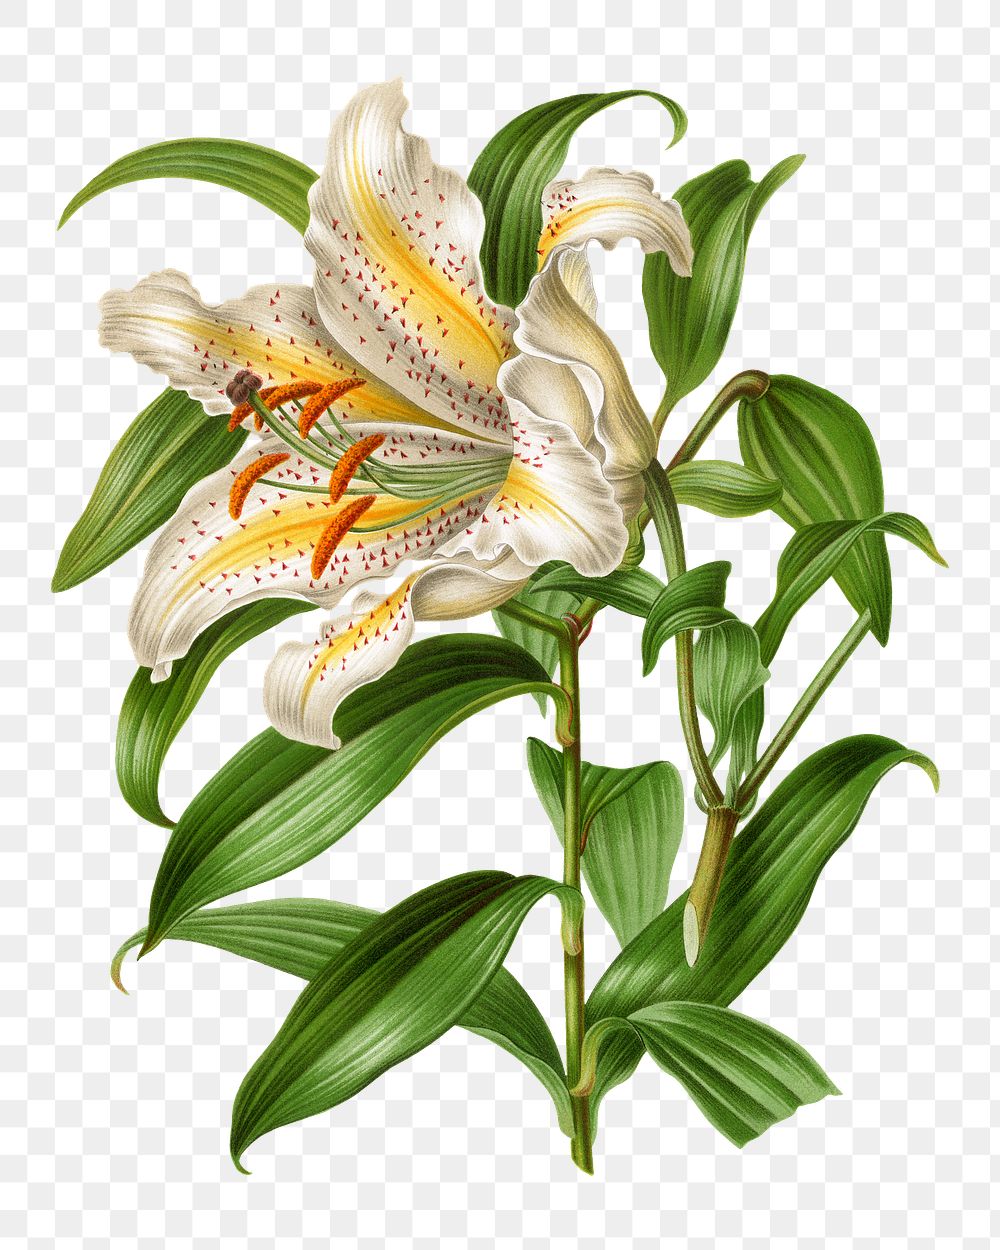 PNG vintage white lily illustration, transparent background. Remixed from our own original 1879 edition of Nederlandsche…